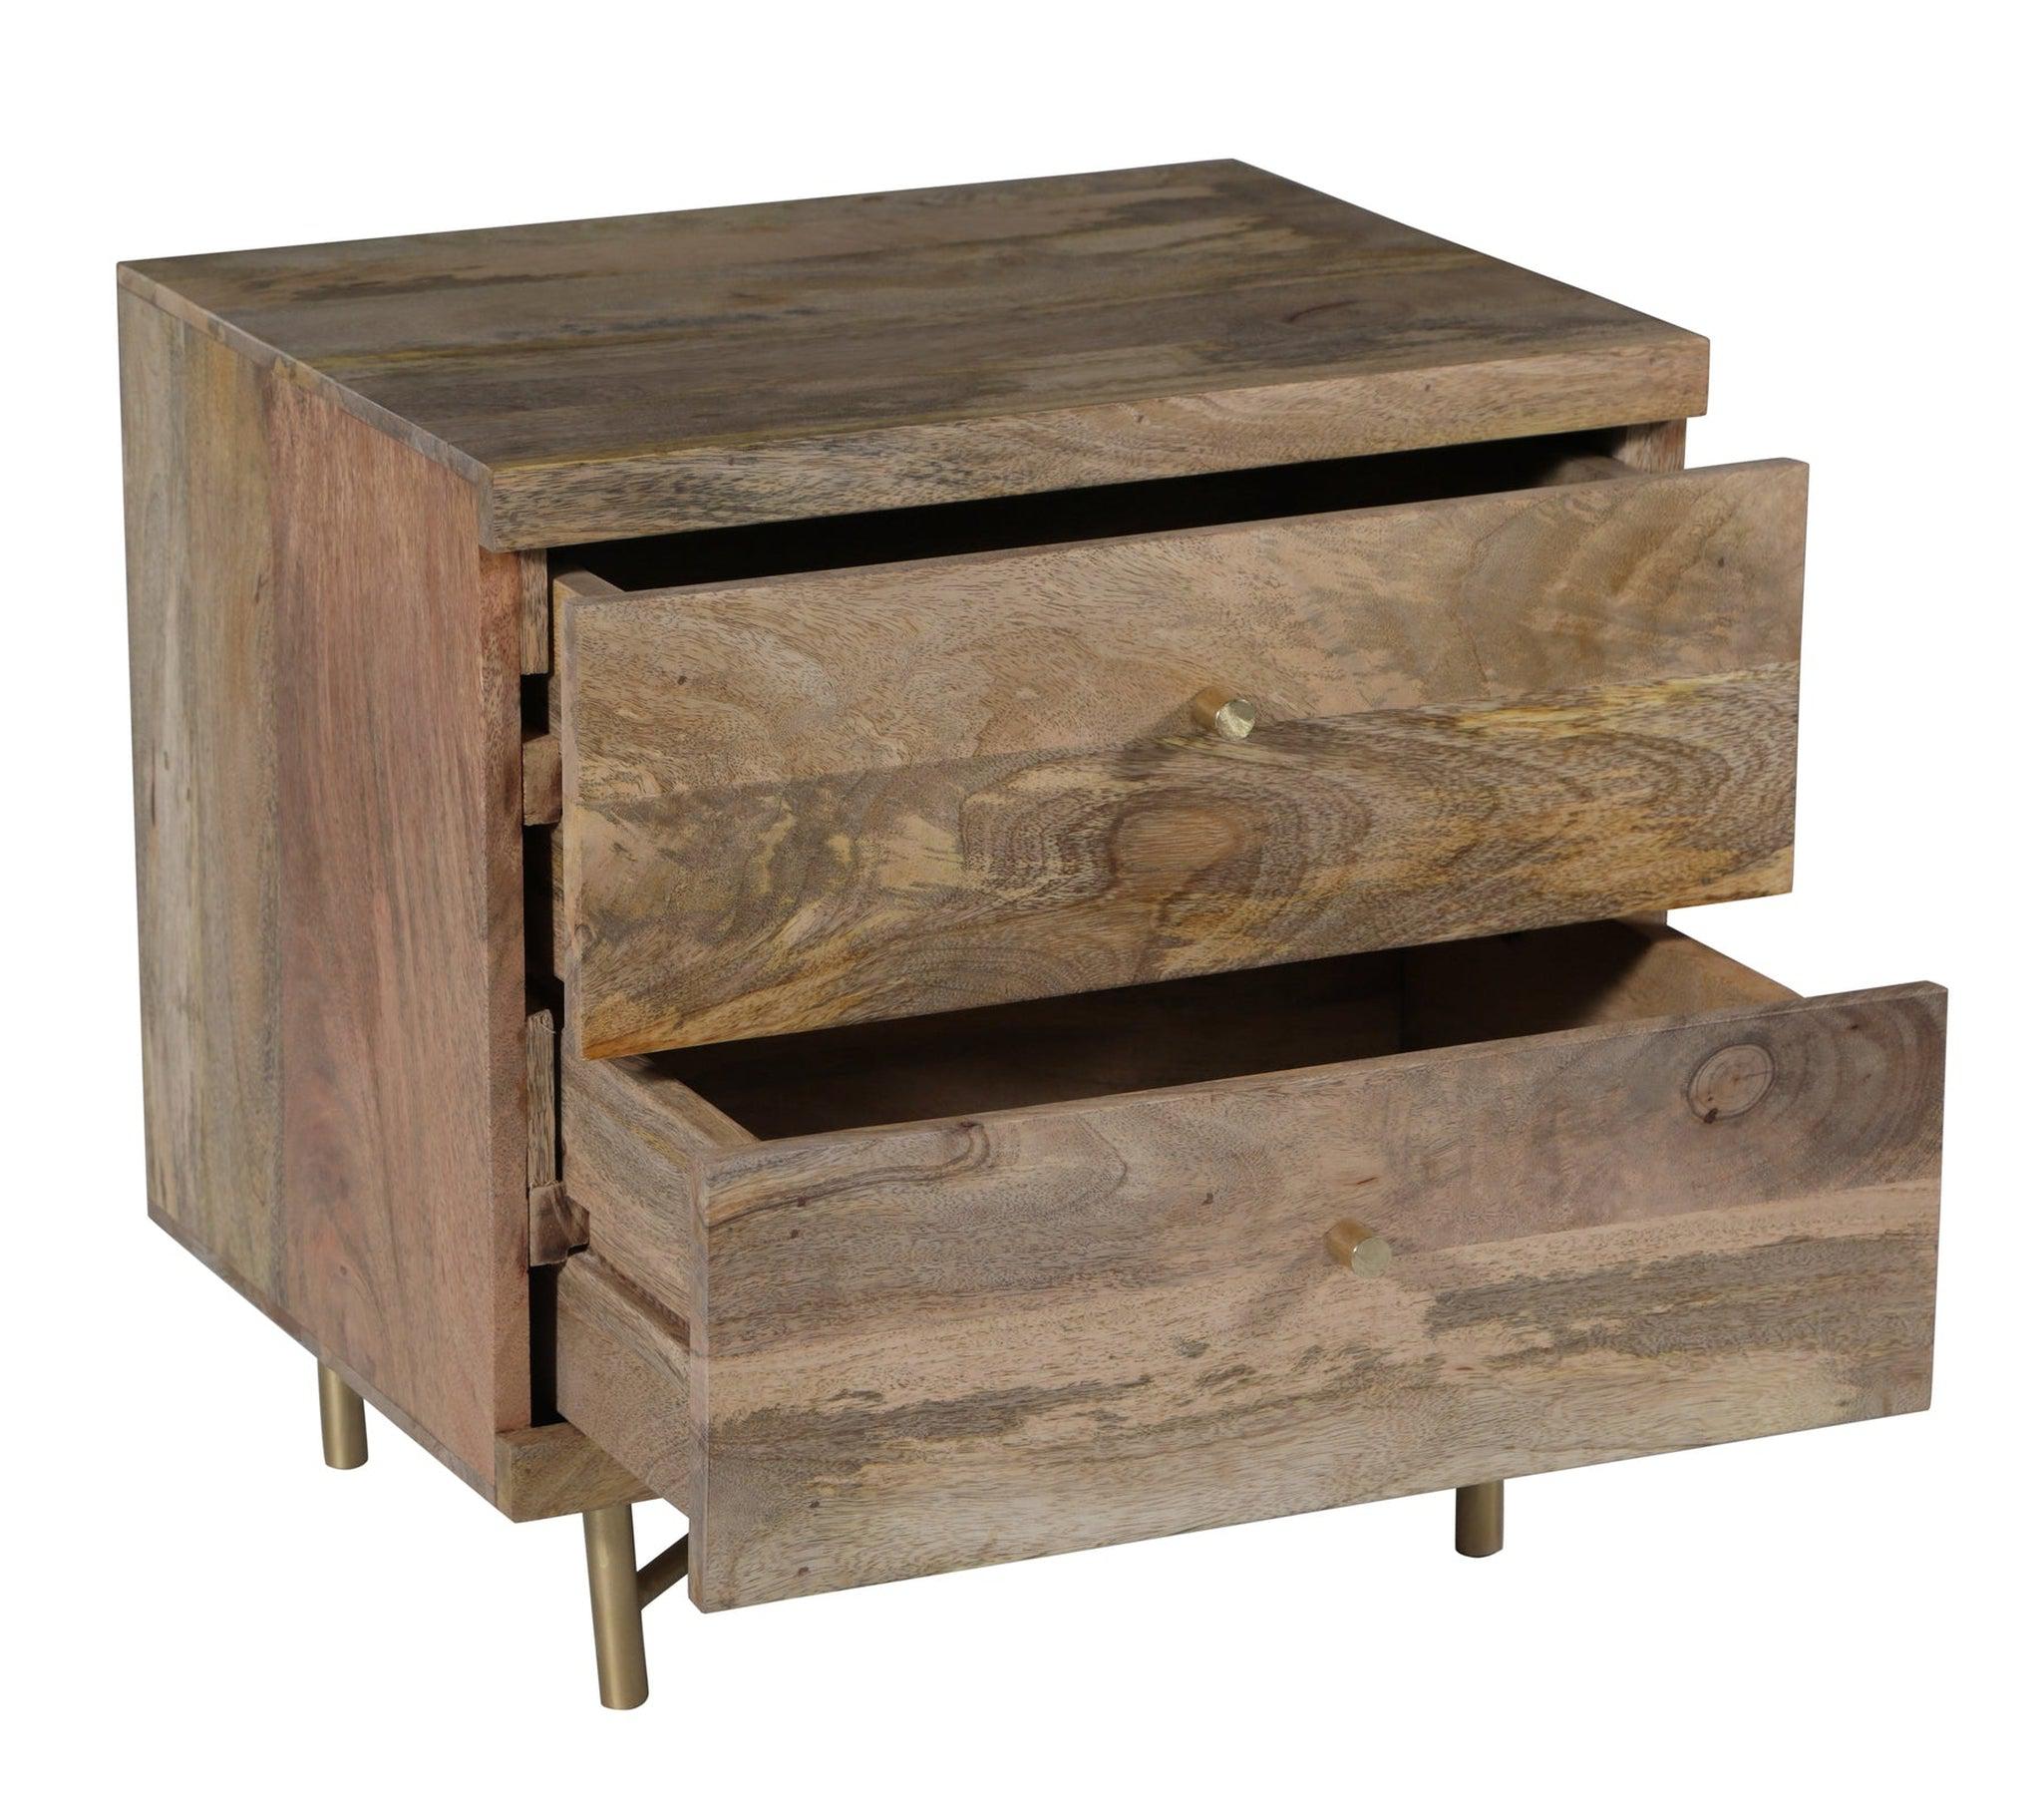 Wooden Ring Range 2 Drawer Bedside Table - Night Stand | 50x40x50 cm